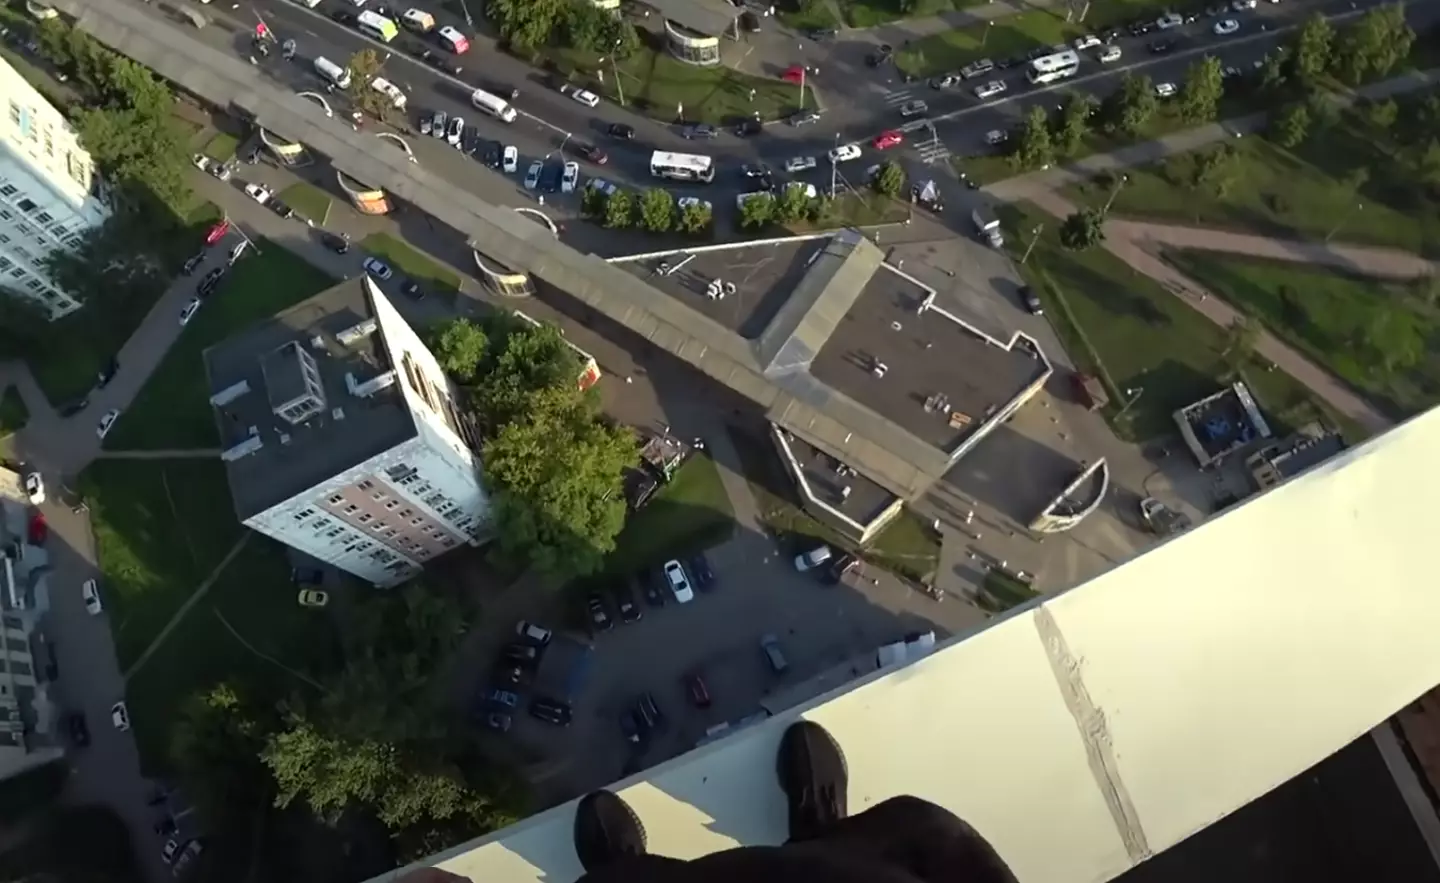 This parkour runner definitely danced with death during the stunt.